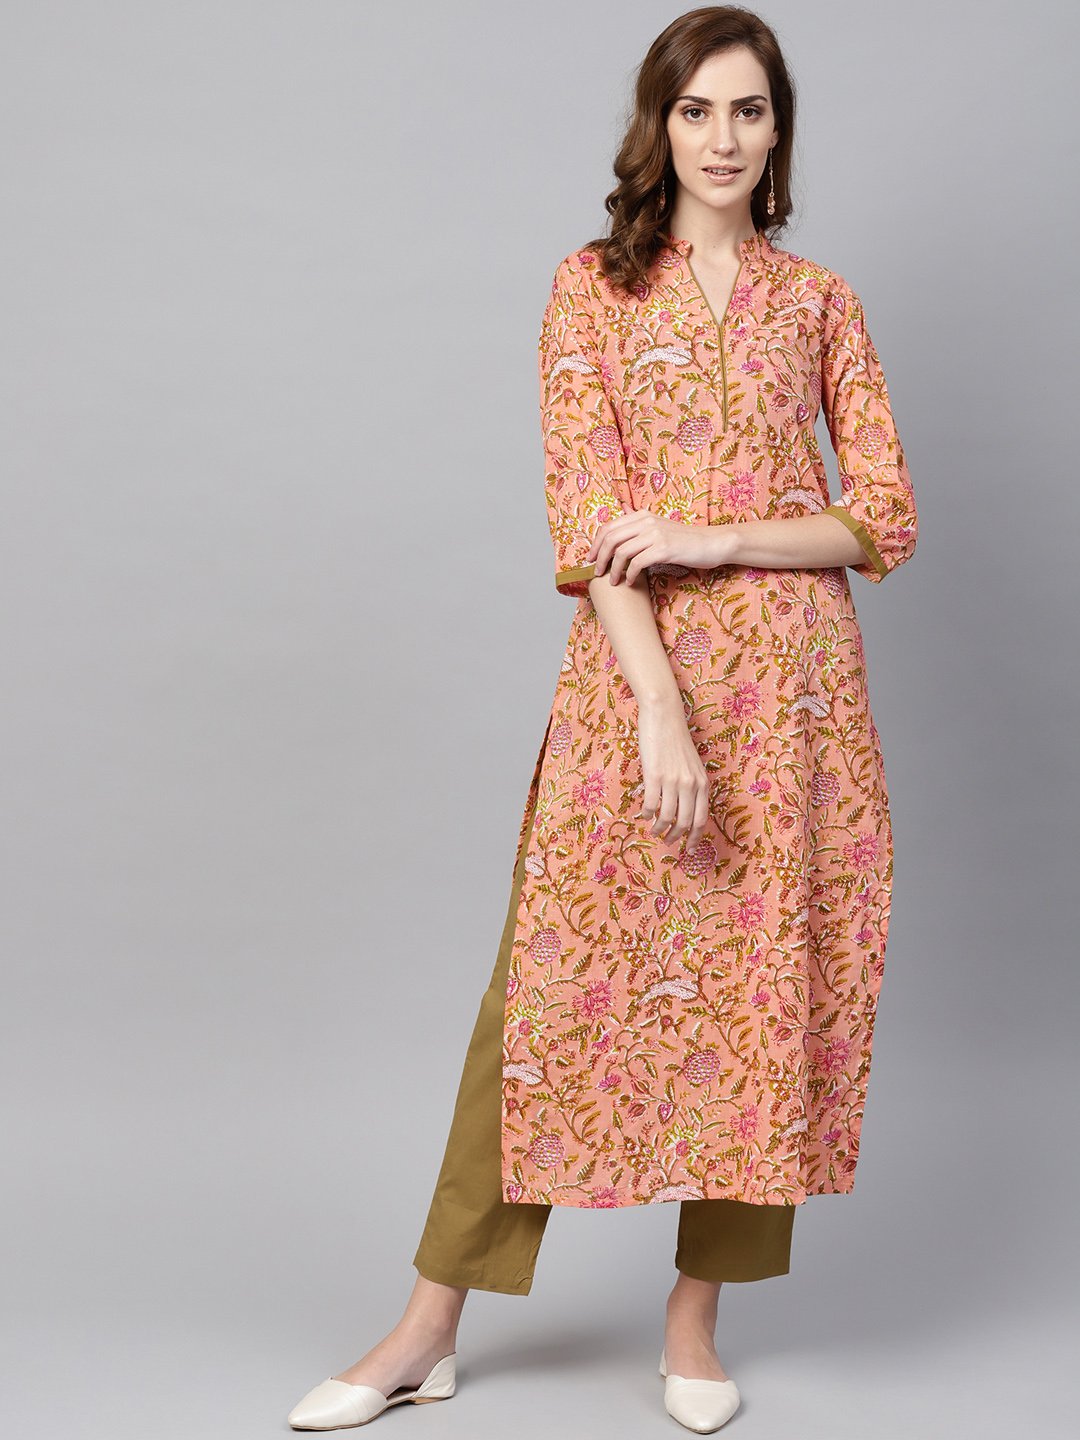 Women's Peach Floral Printed Kurta With Solid Olive Green Pants - Nayo Clothing